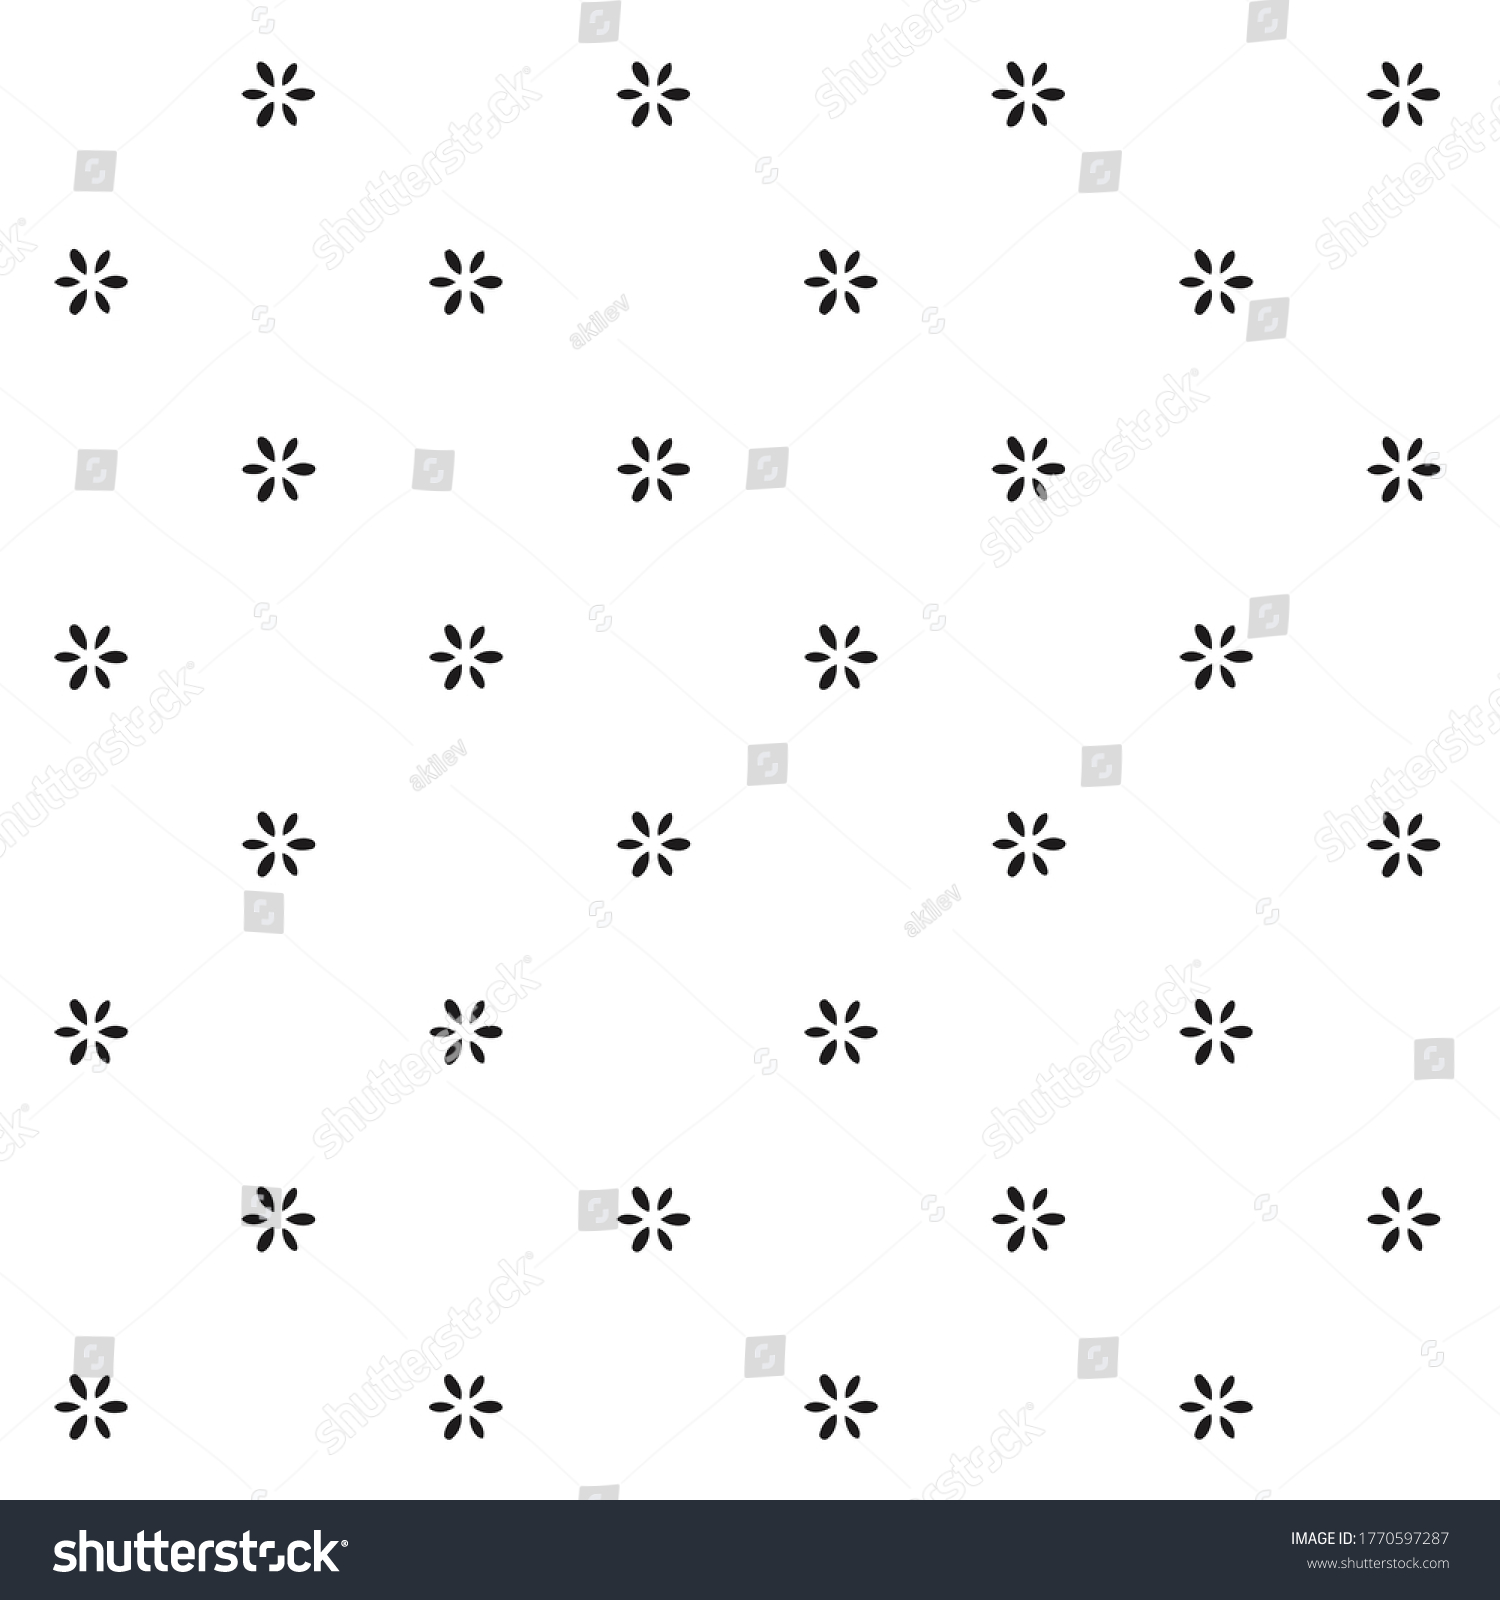 SVG of Small black flowers motif pattern white background monochrome graphic floral digital wallpaper, fabric design. Ladies dress, apparel textile, garment, wrap packaging delicate all over geo print block. svg